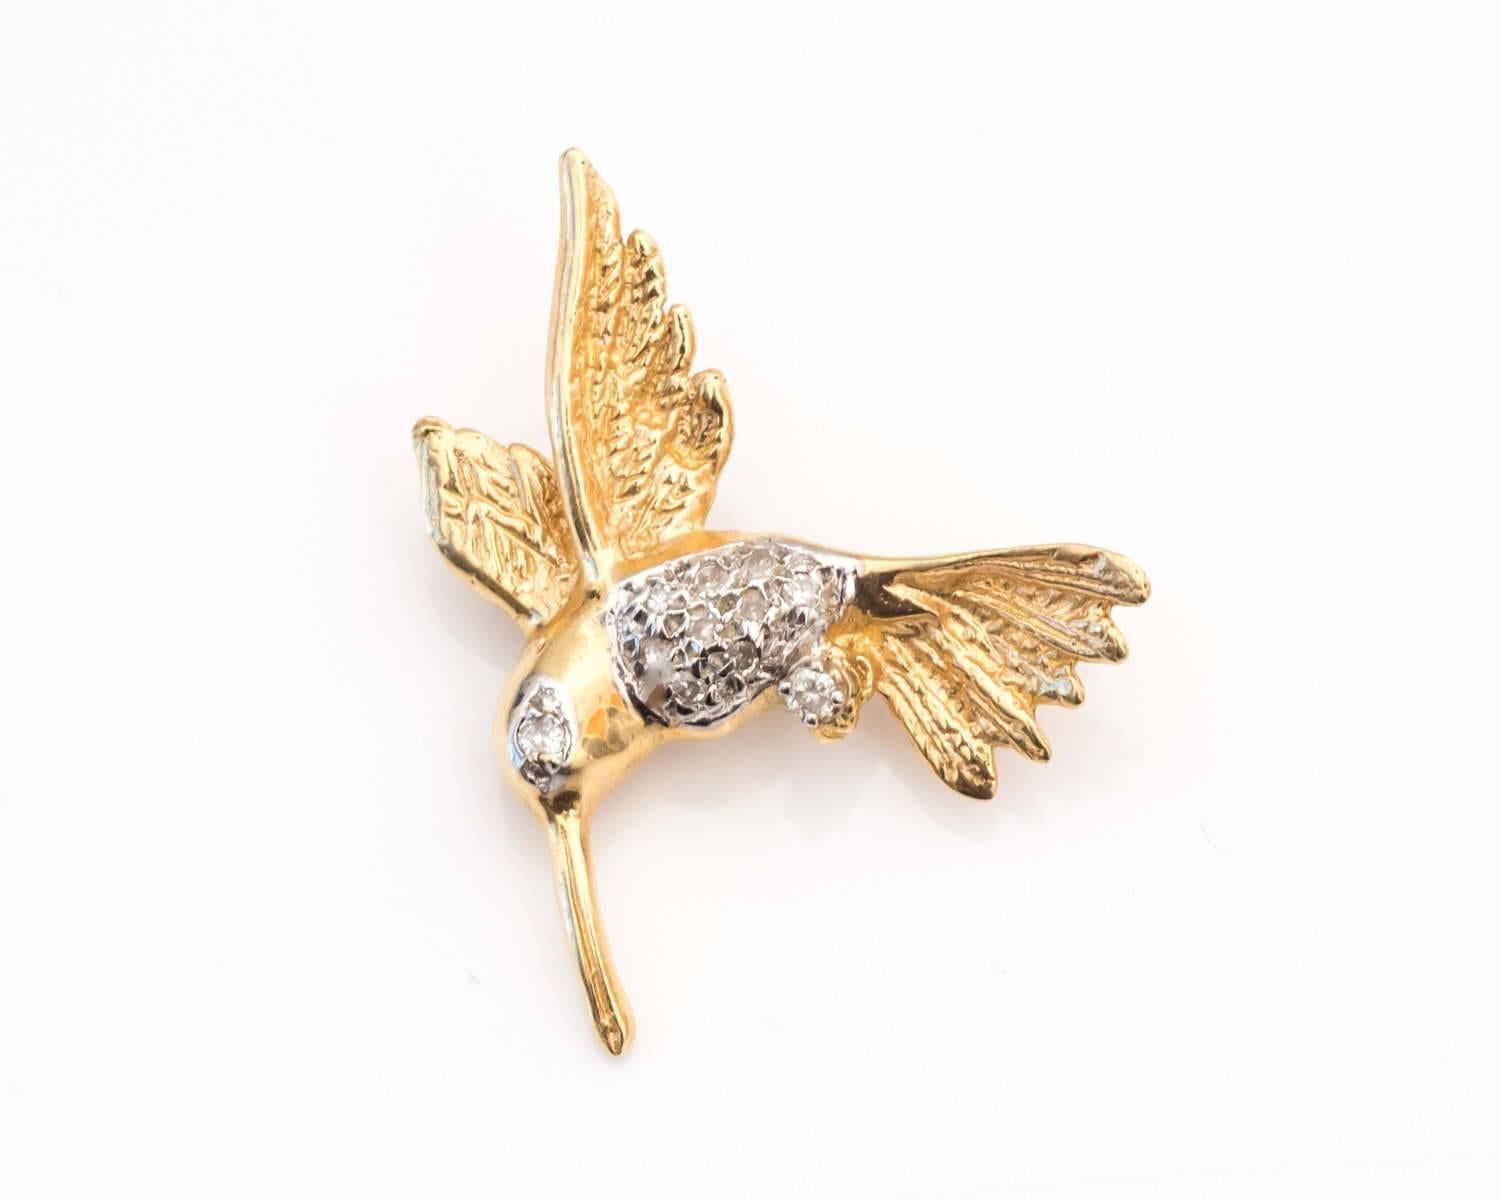 Gorgeous Brooch featuring a Hummingbird Design
Simply Adorable and Elegantly Detailed 
Torso and Eye of the Bird have Diamonds inlayed to the Frame with 14 Karat White Gold
Remainder of the Pin is composed of 14 Karat Yellow Gold for Brilliant Shine